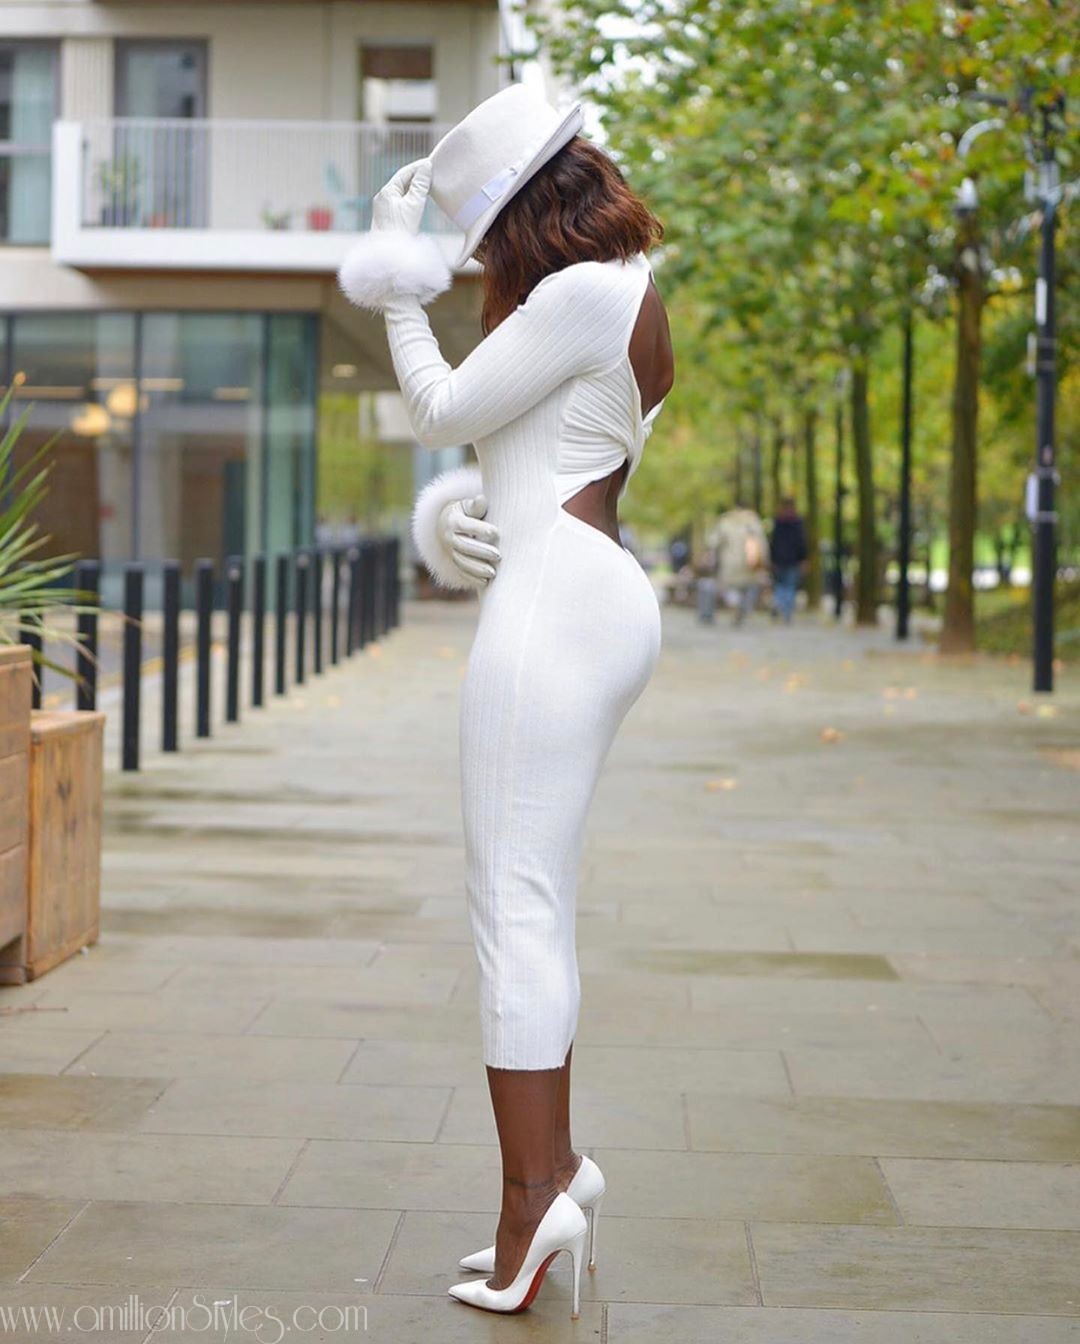 These Beautiful Women Will Make You Fall In Love With White Dresses